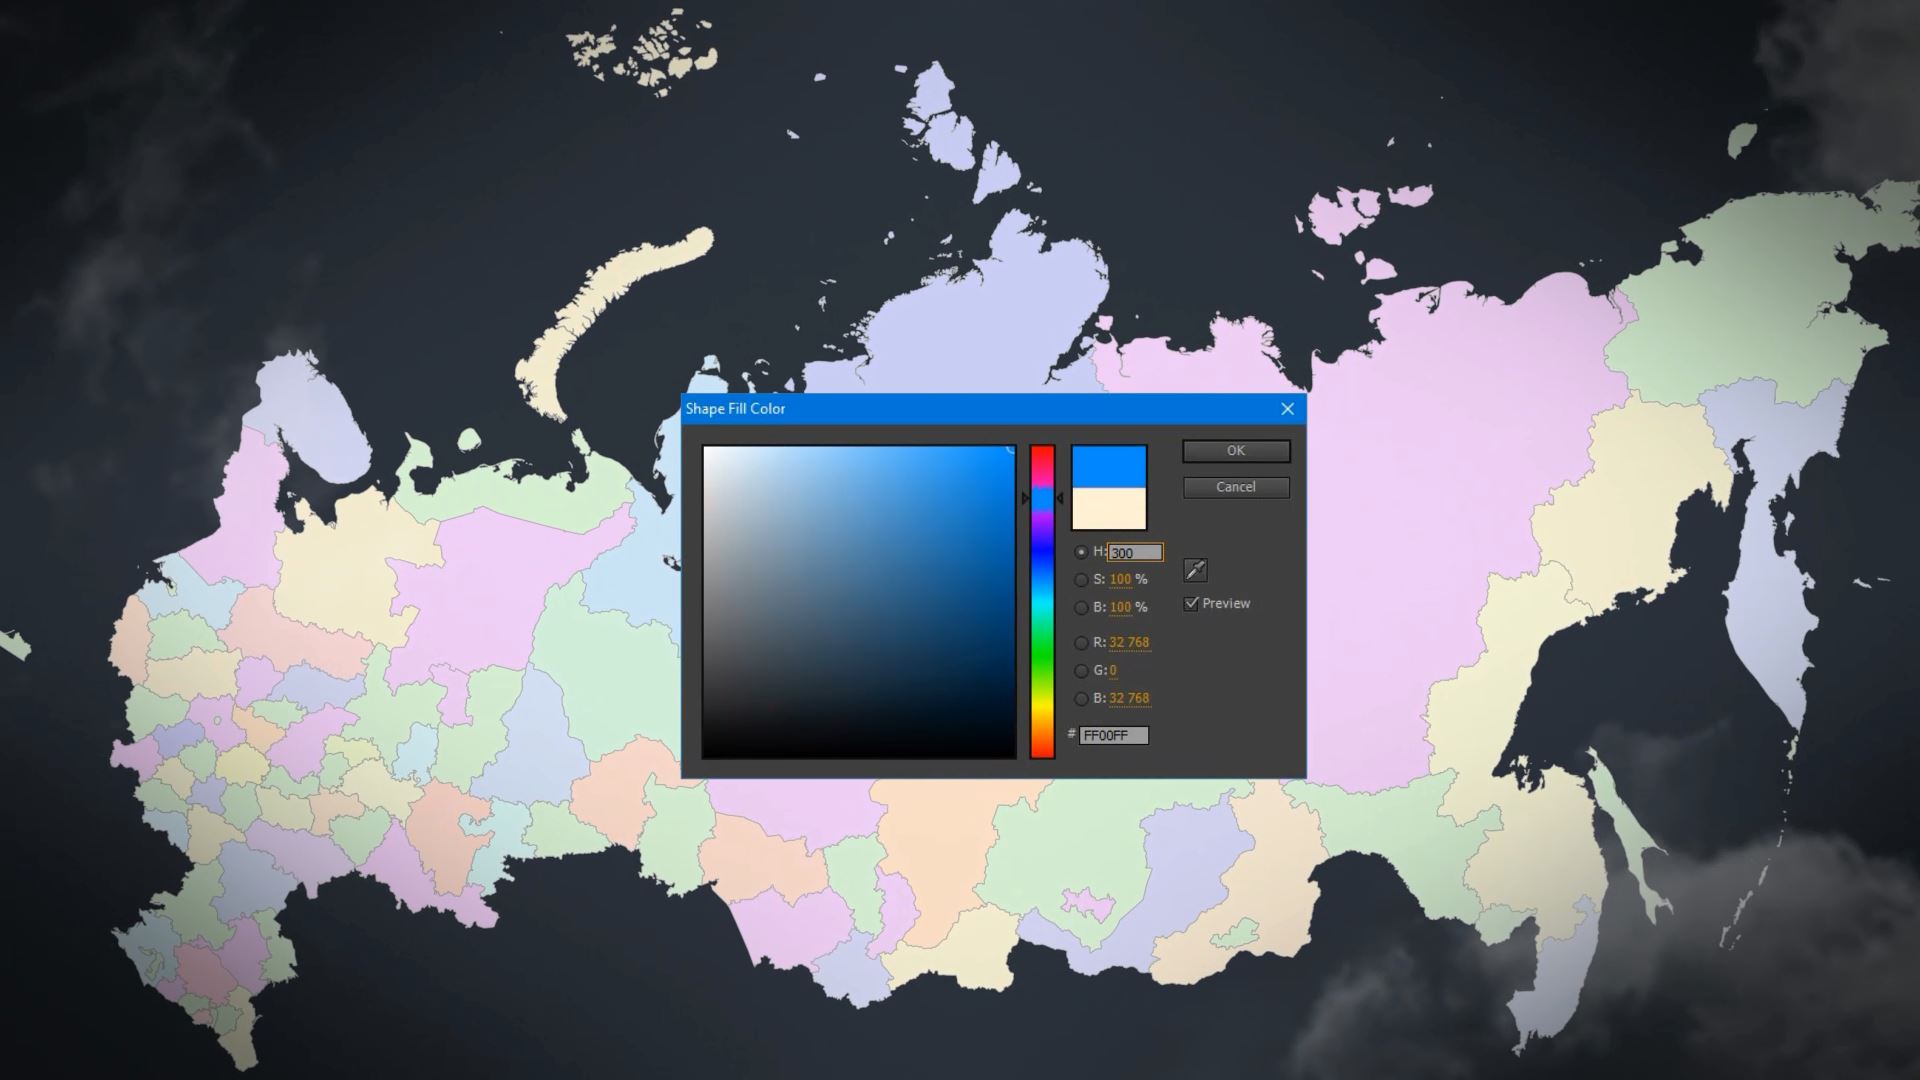  Russia Map - Russian Federation Map Kit 